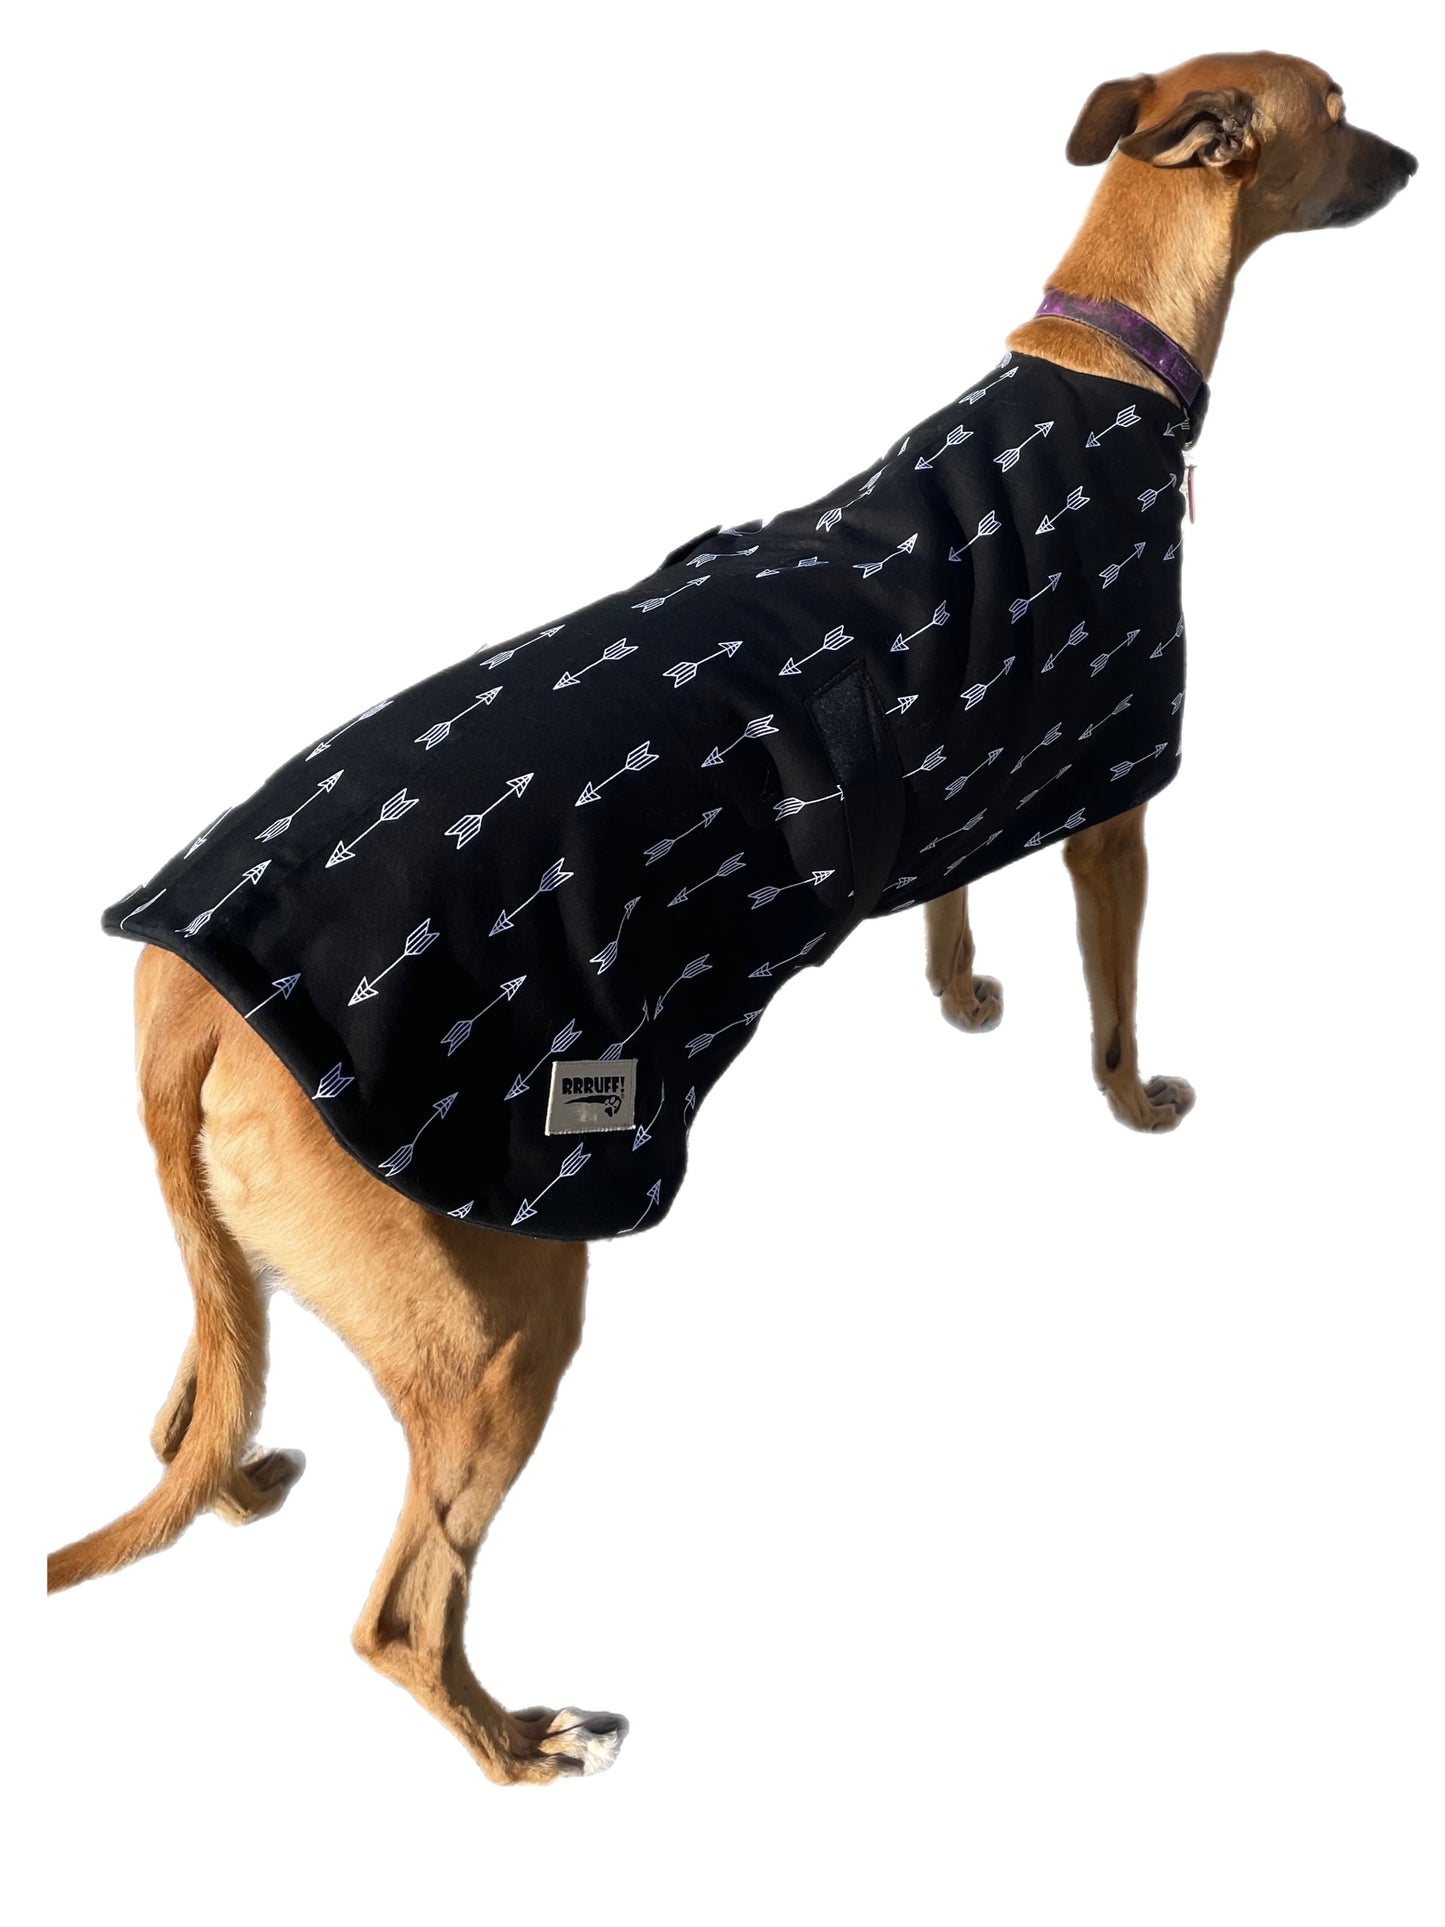 Spring classic style Greyhound coat design in a soft black and white cotton & lush fleece washable